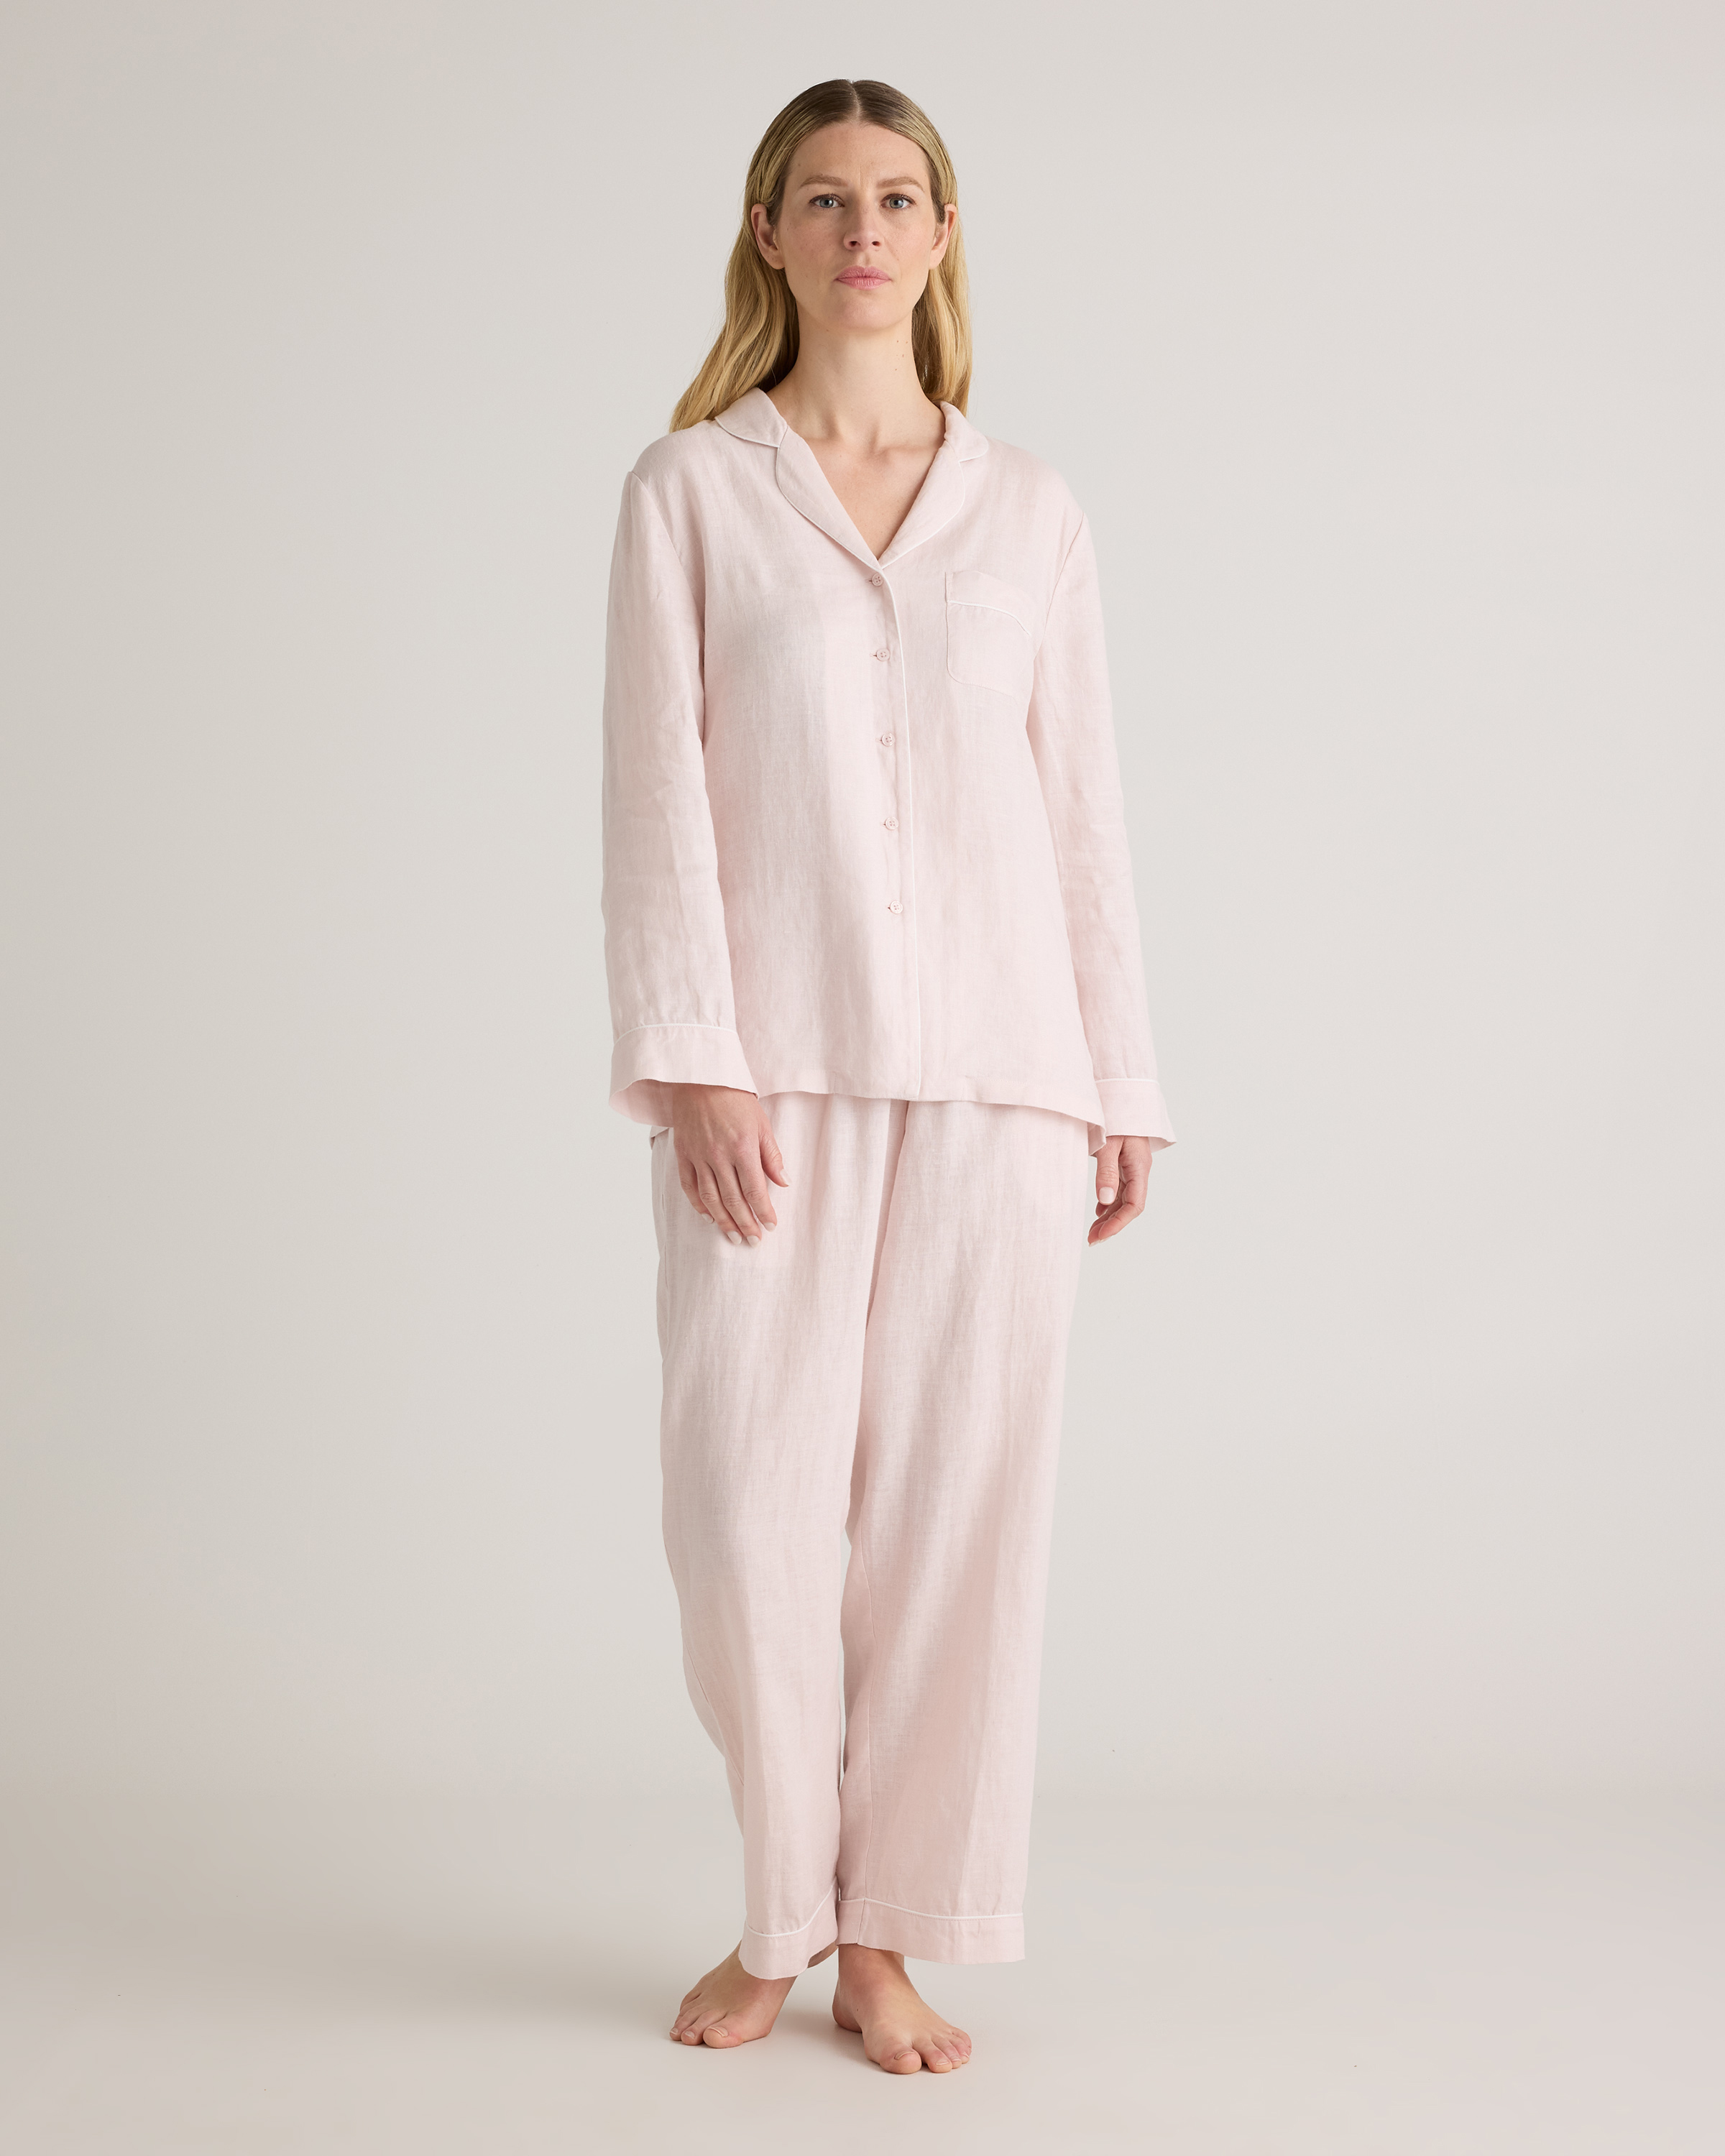 100% European Linen Long Sleeve Pajama Set with Piping